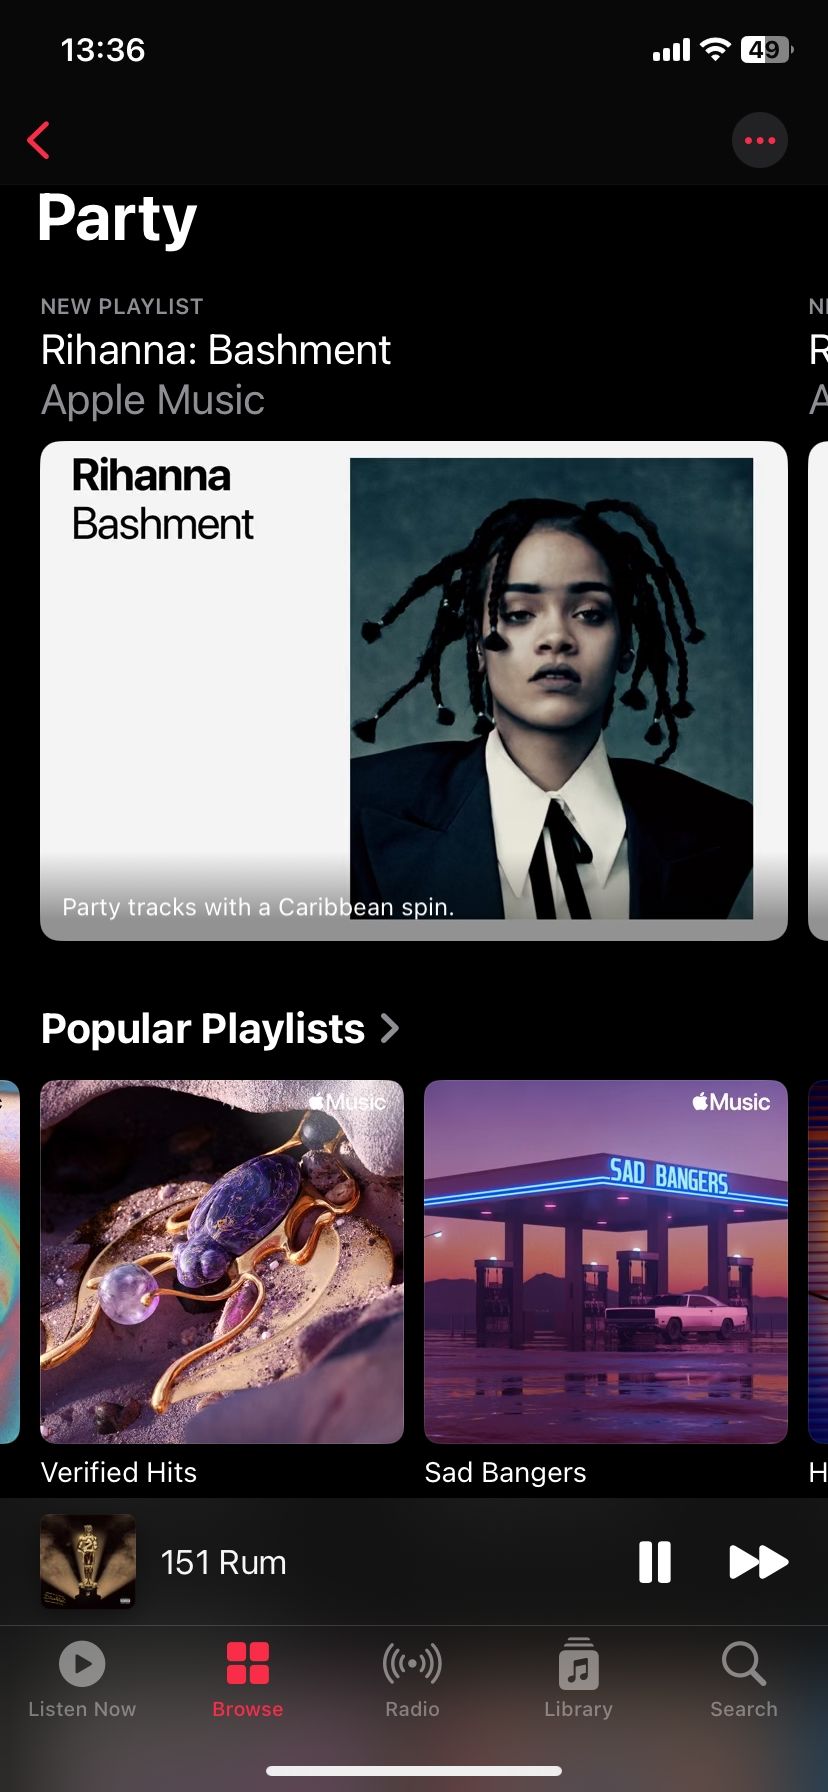 Party Apple Music curated playlists